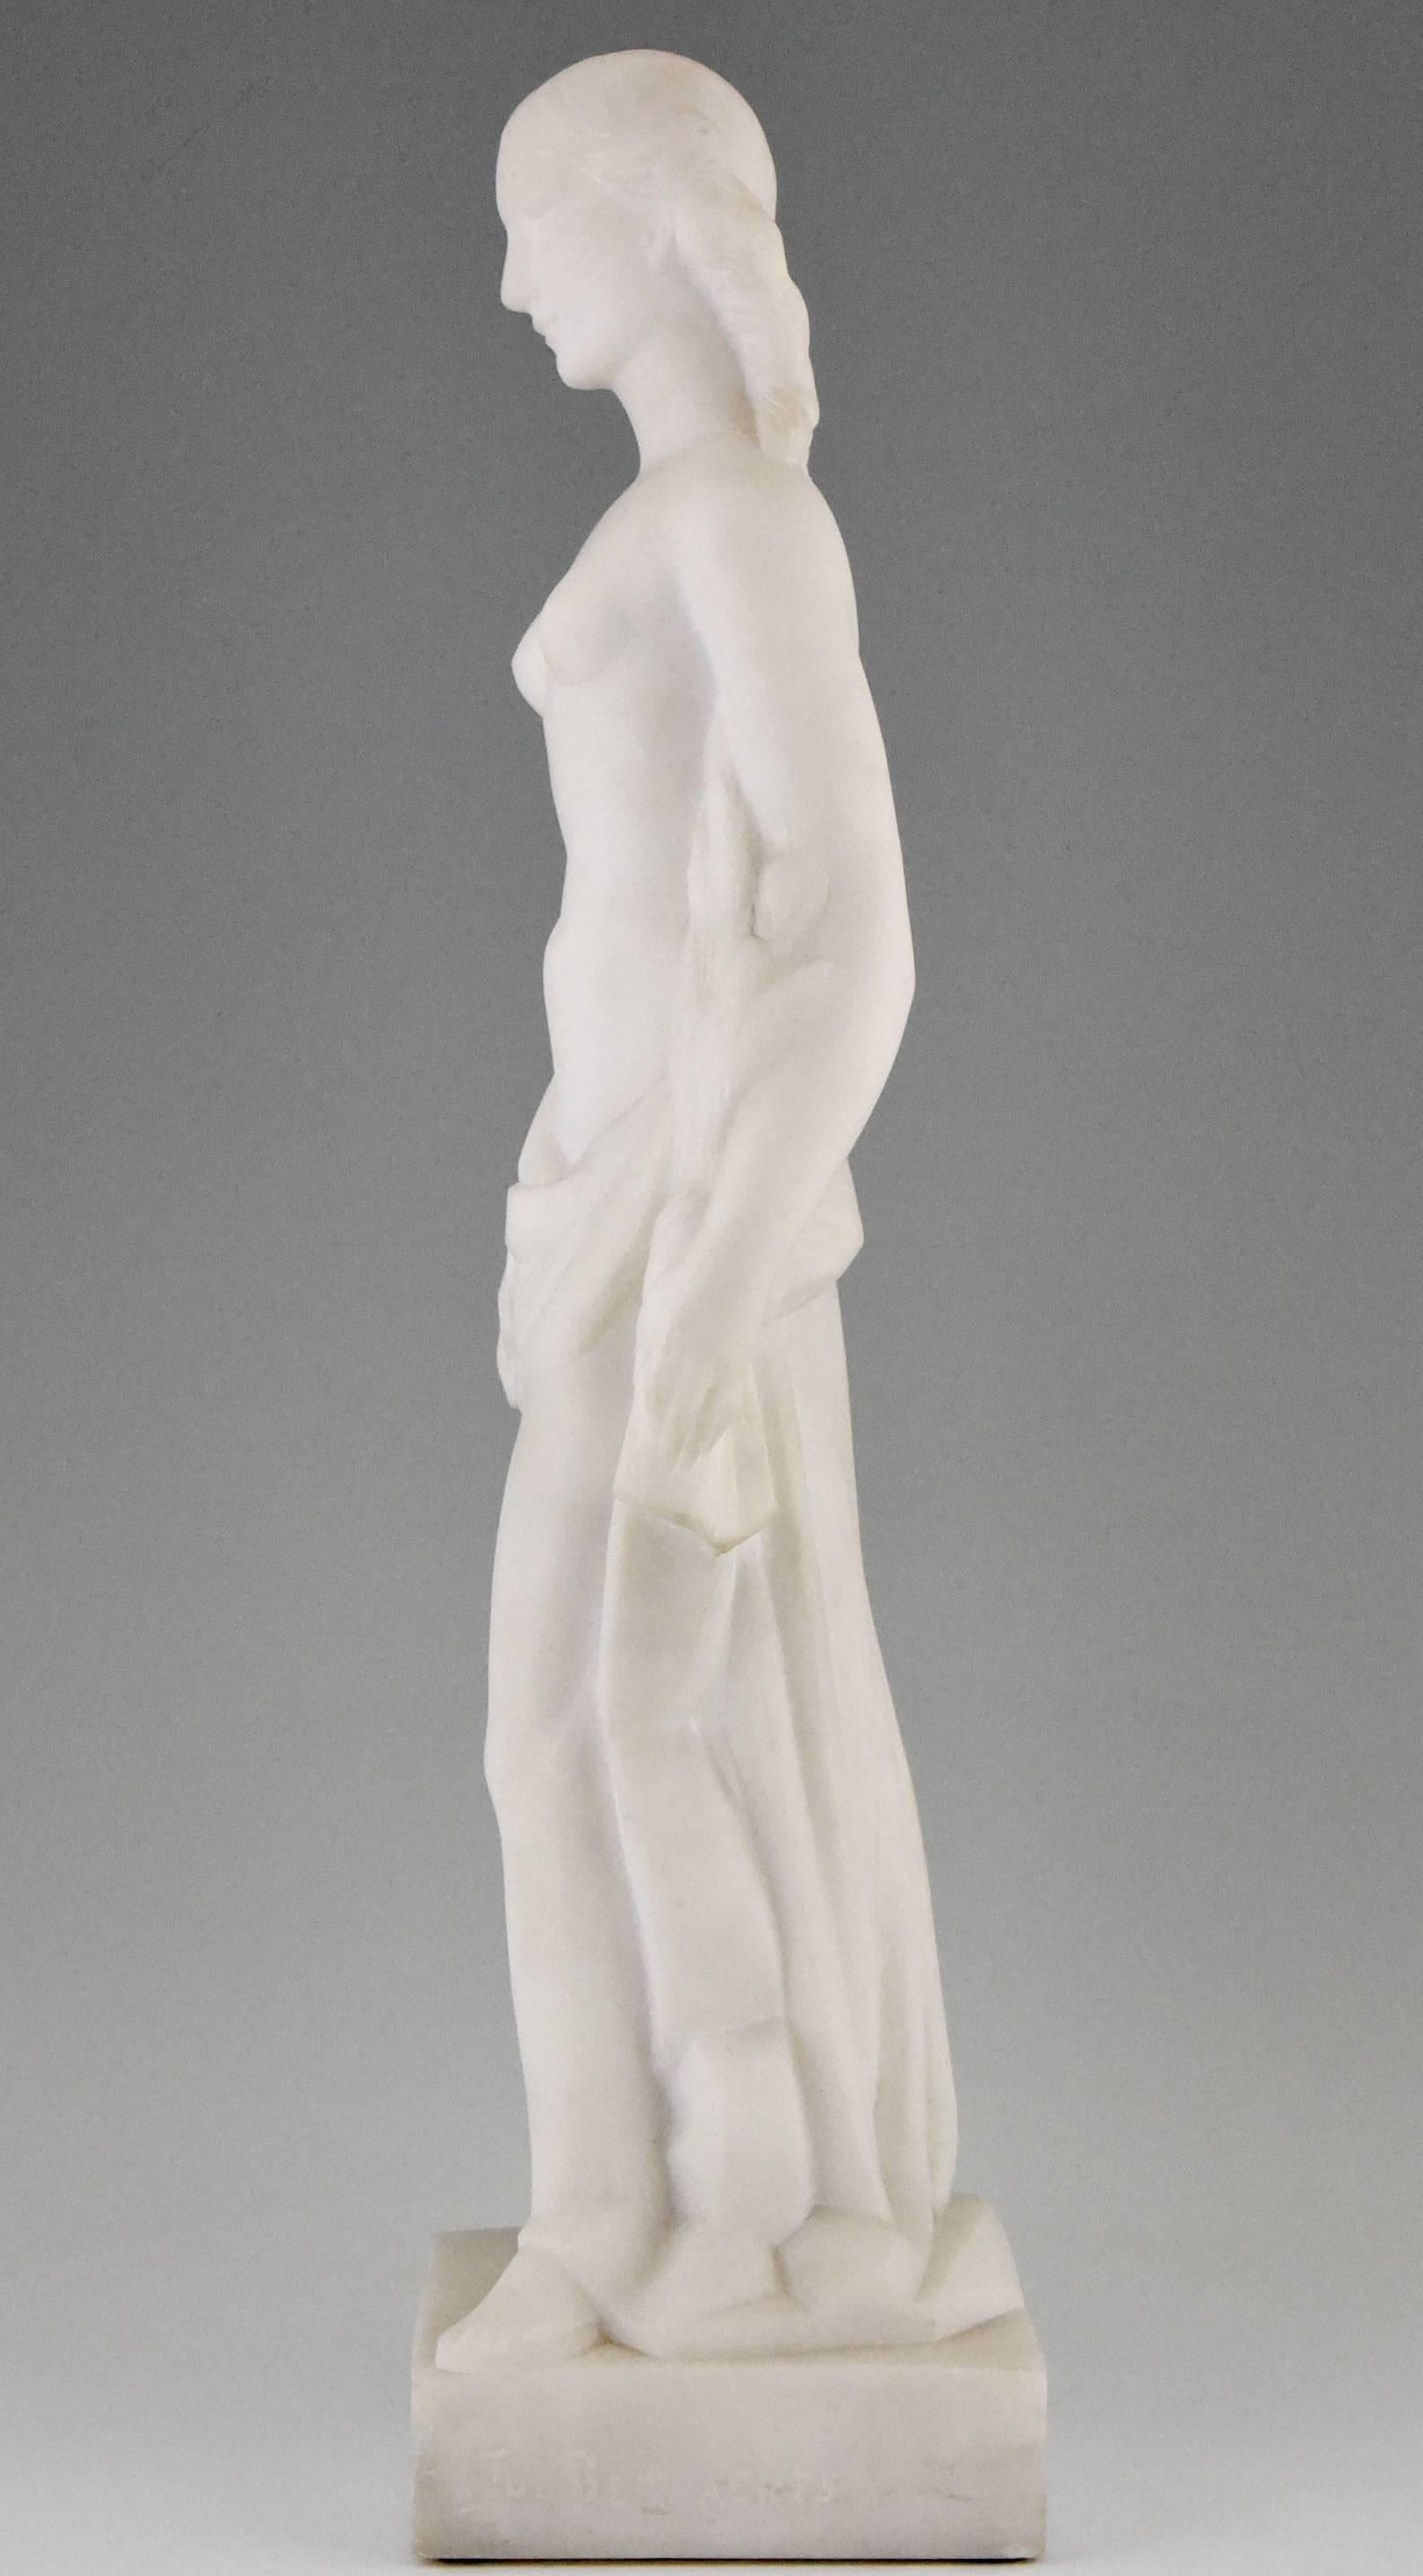 Carrara Marble Art Deco White Marble Sculpture of a Nude by Jules Bernaerts, 1935